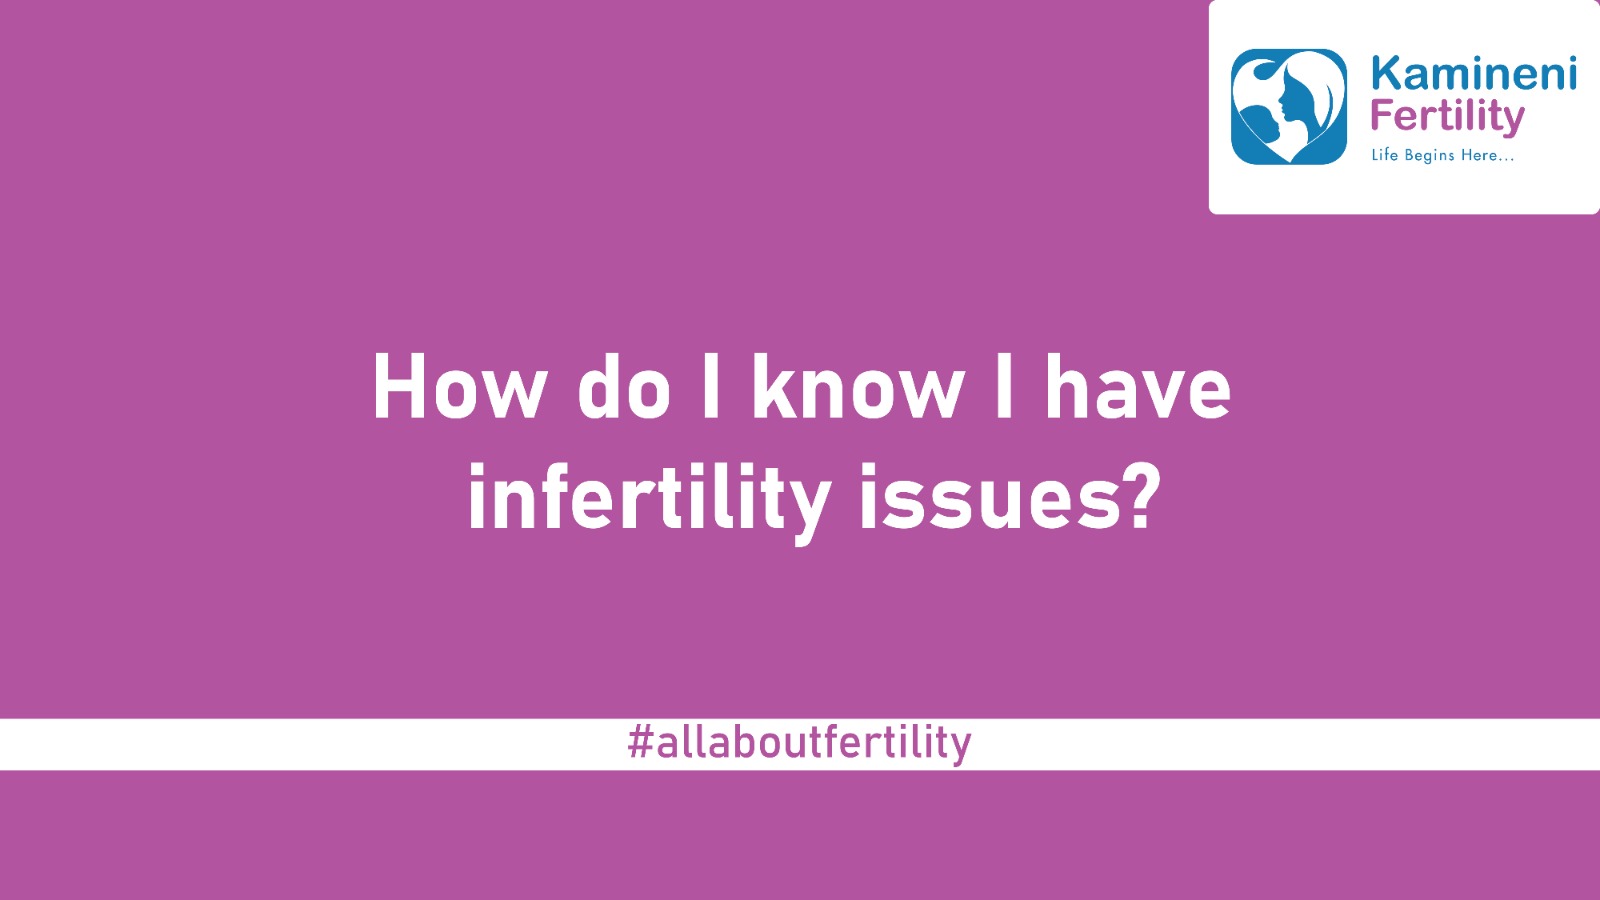 How to I know I have infertility issues?